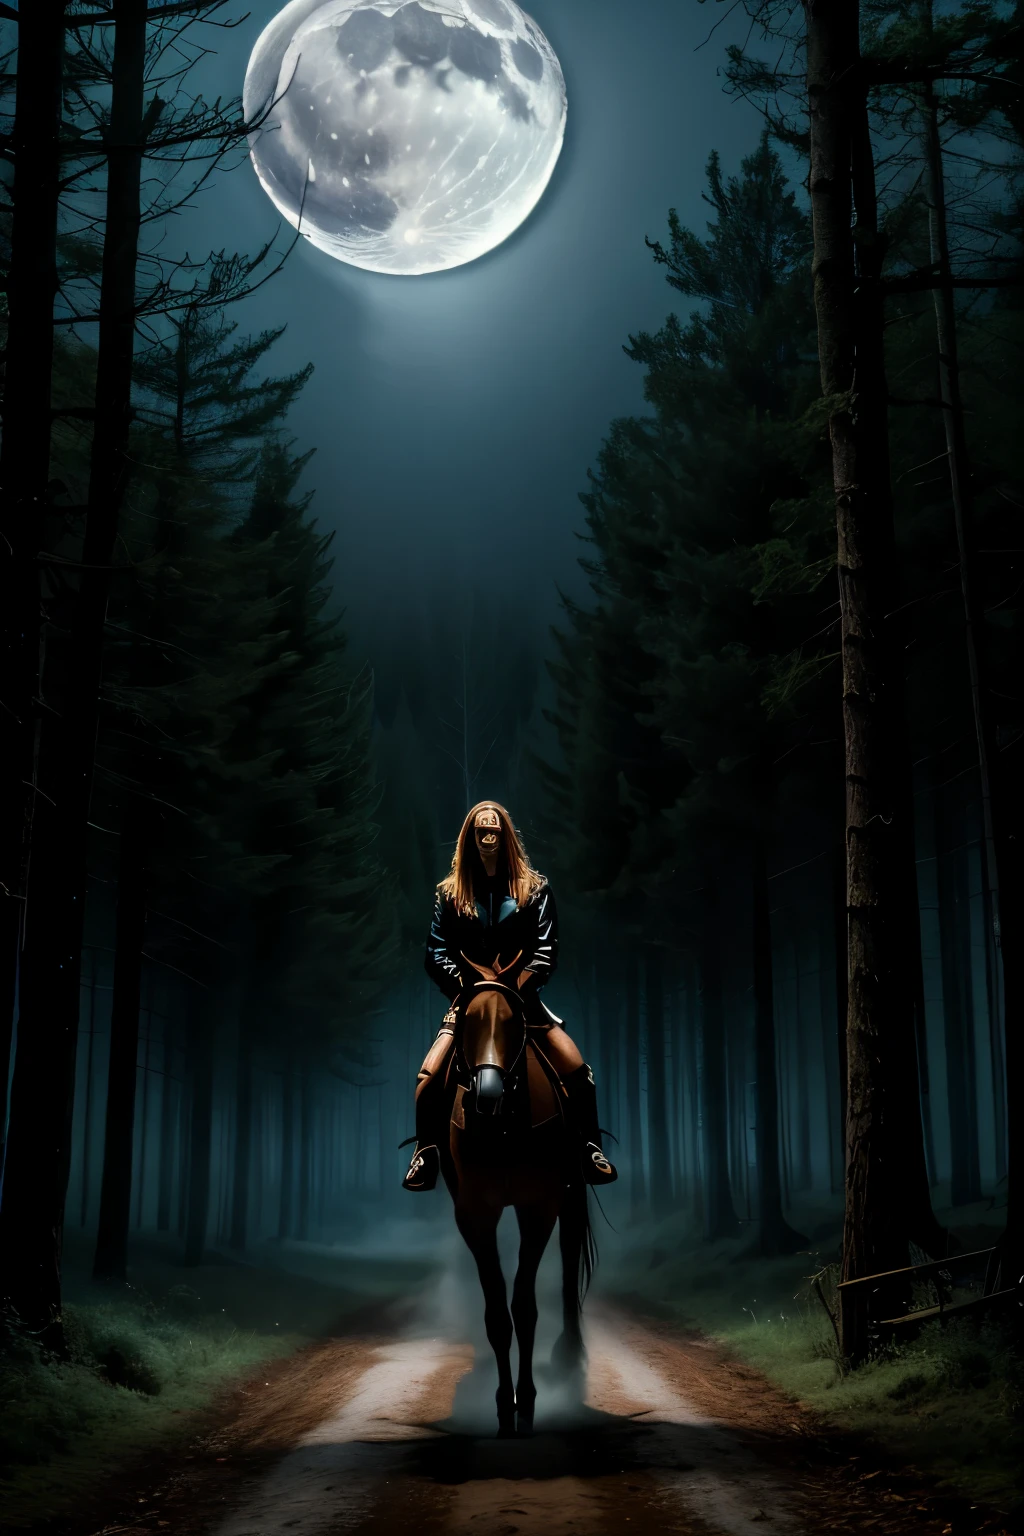 (best quality,highres:1.2),ultra-detailed,realistic,horror,portrait,forest scene,scary girl riding horse,moonlit night,haunting atmosphere,ominous mist and fog,majestic trees,star-filled sky